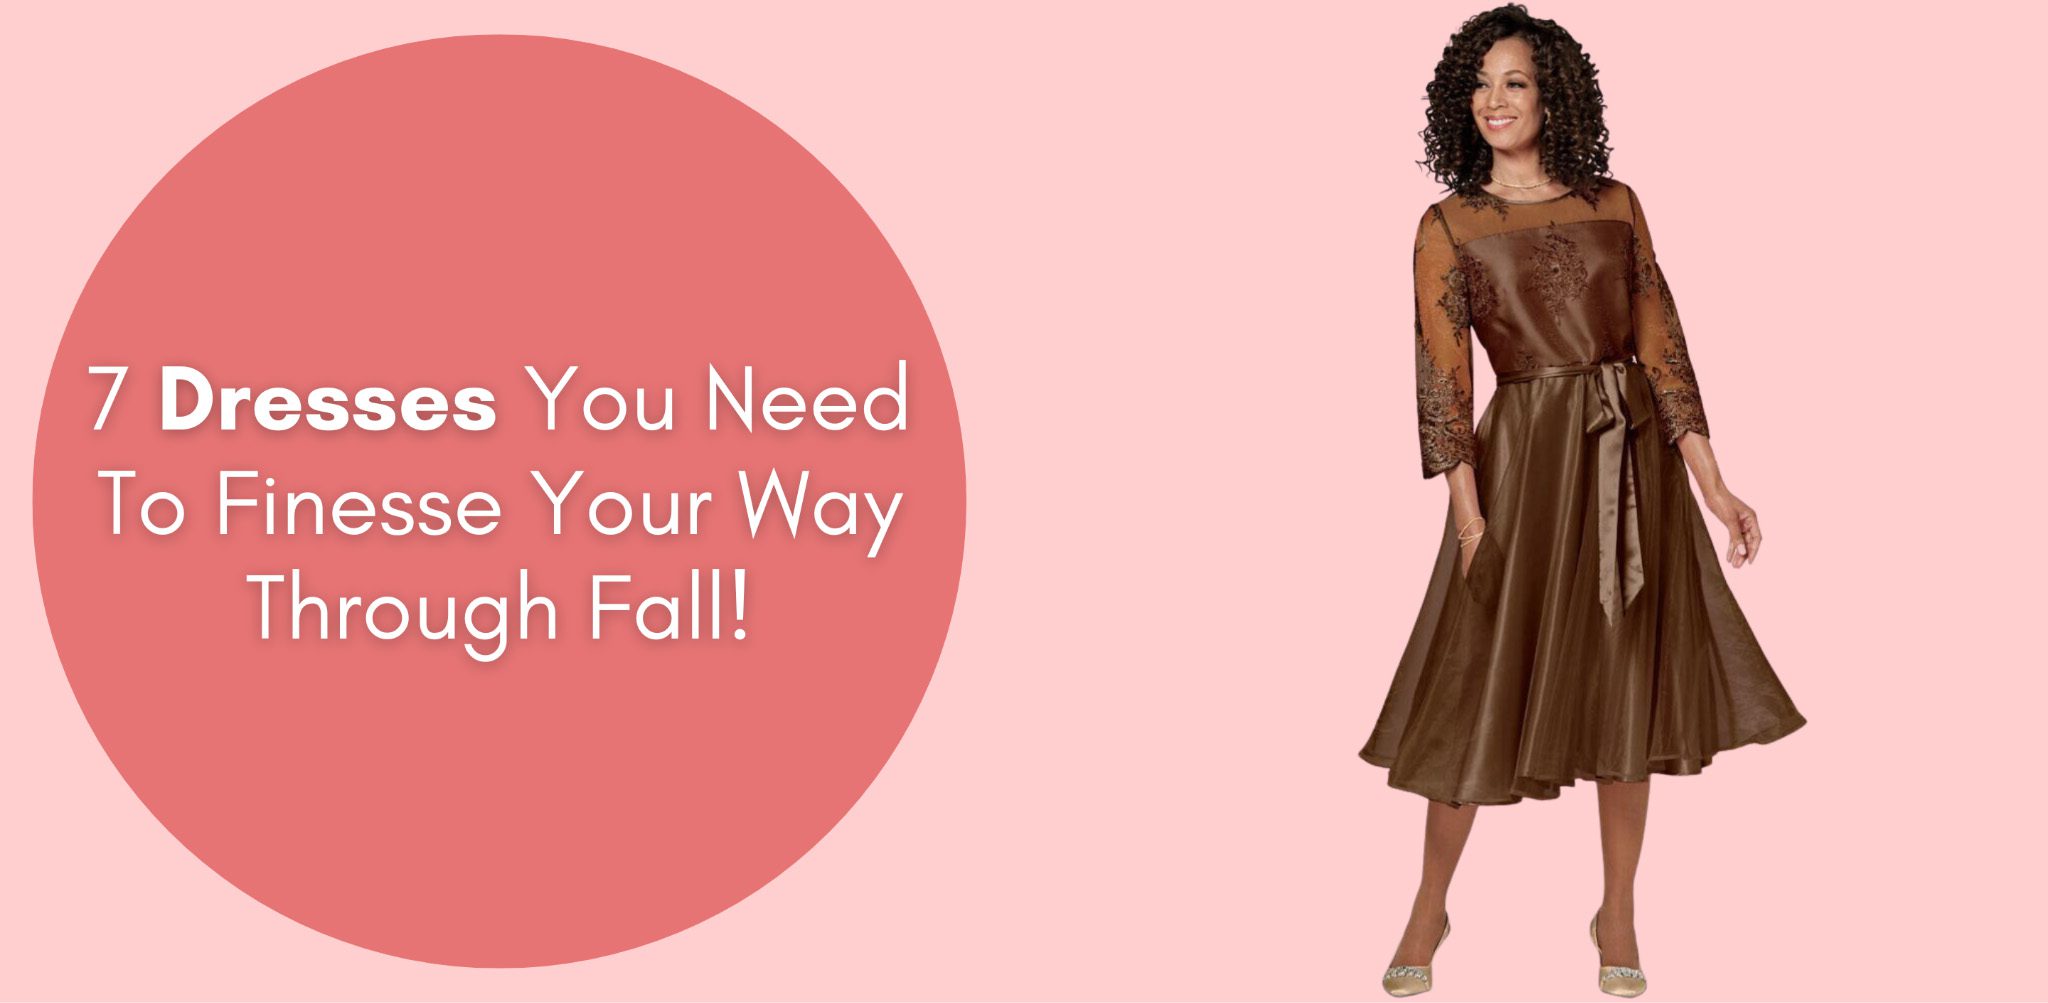 7 Dresses You Need To Finesse Your Way Through Fall!